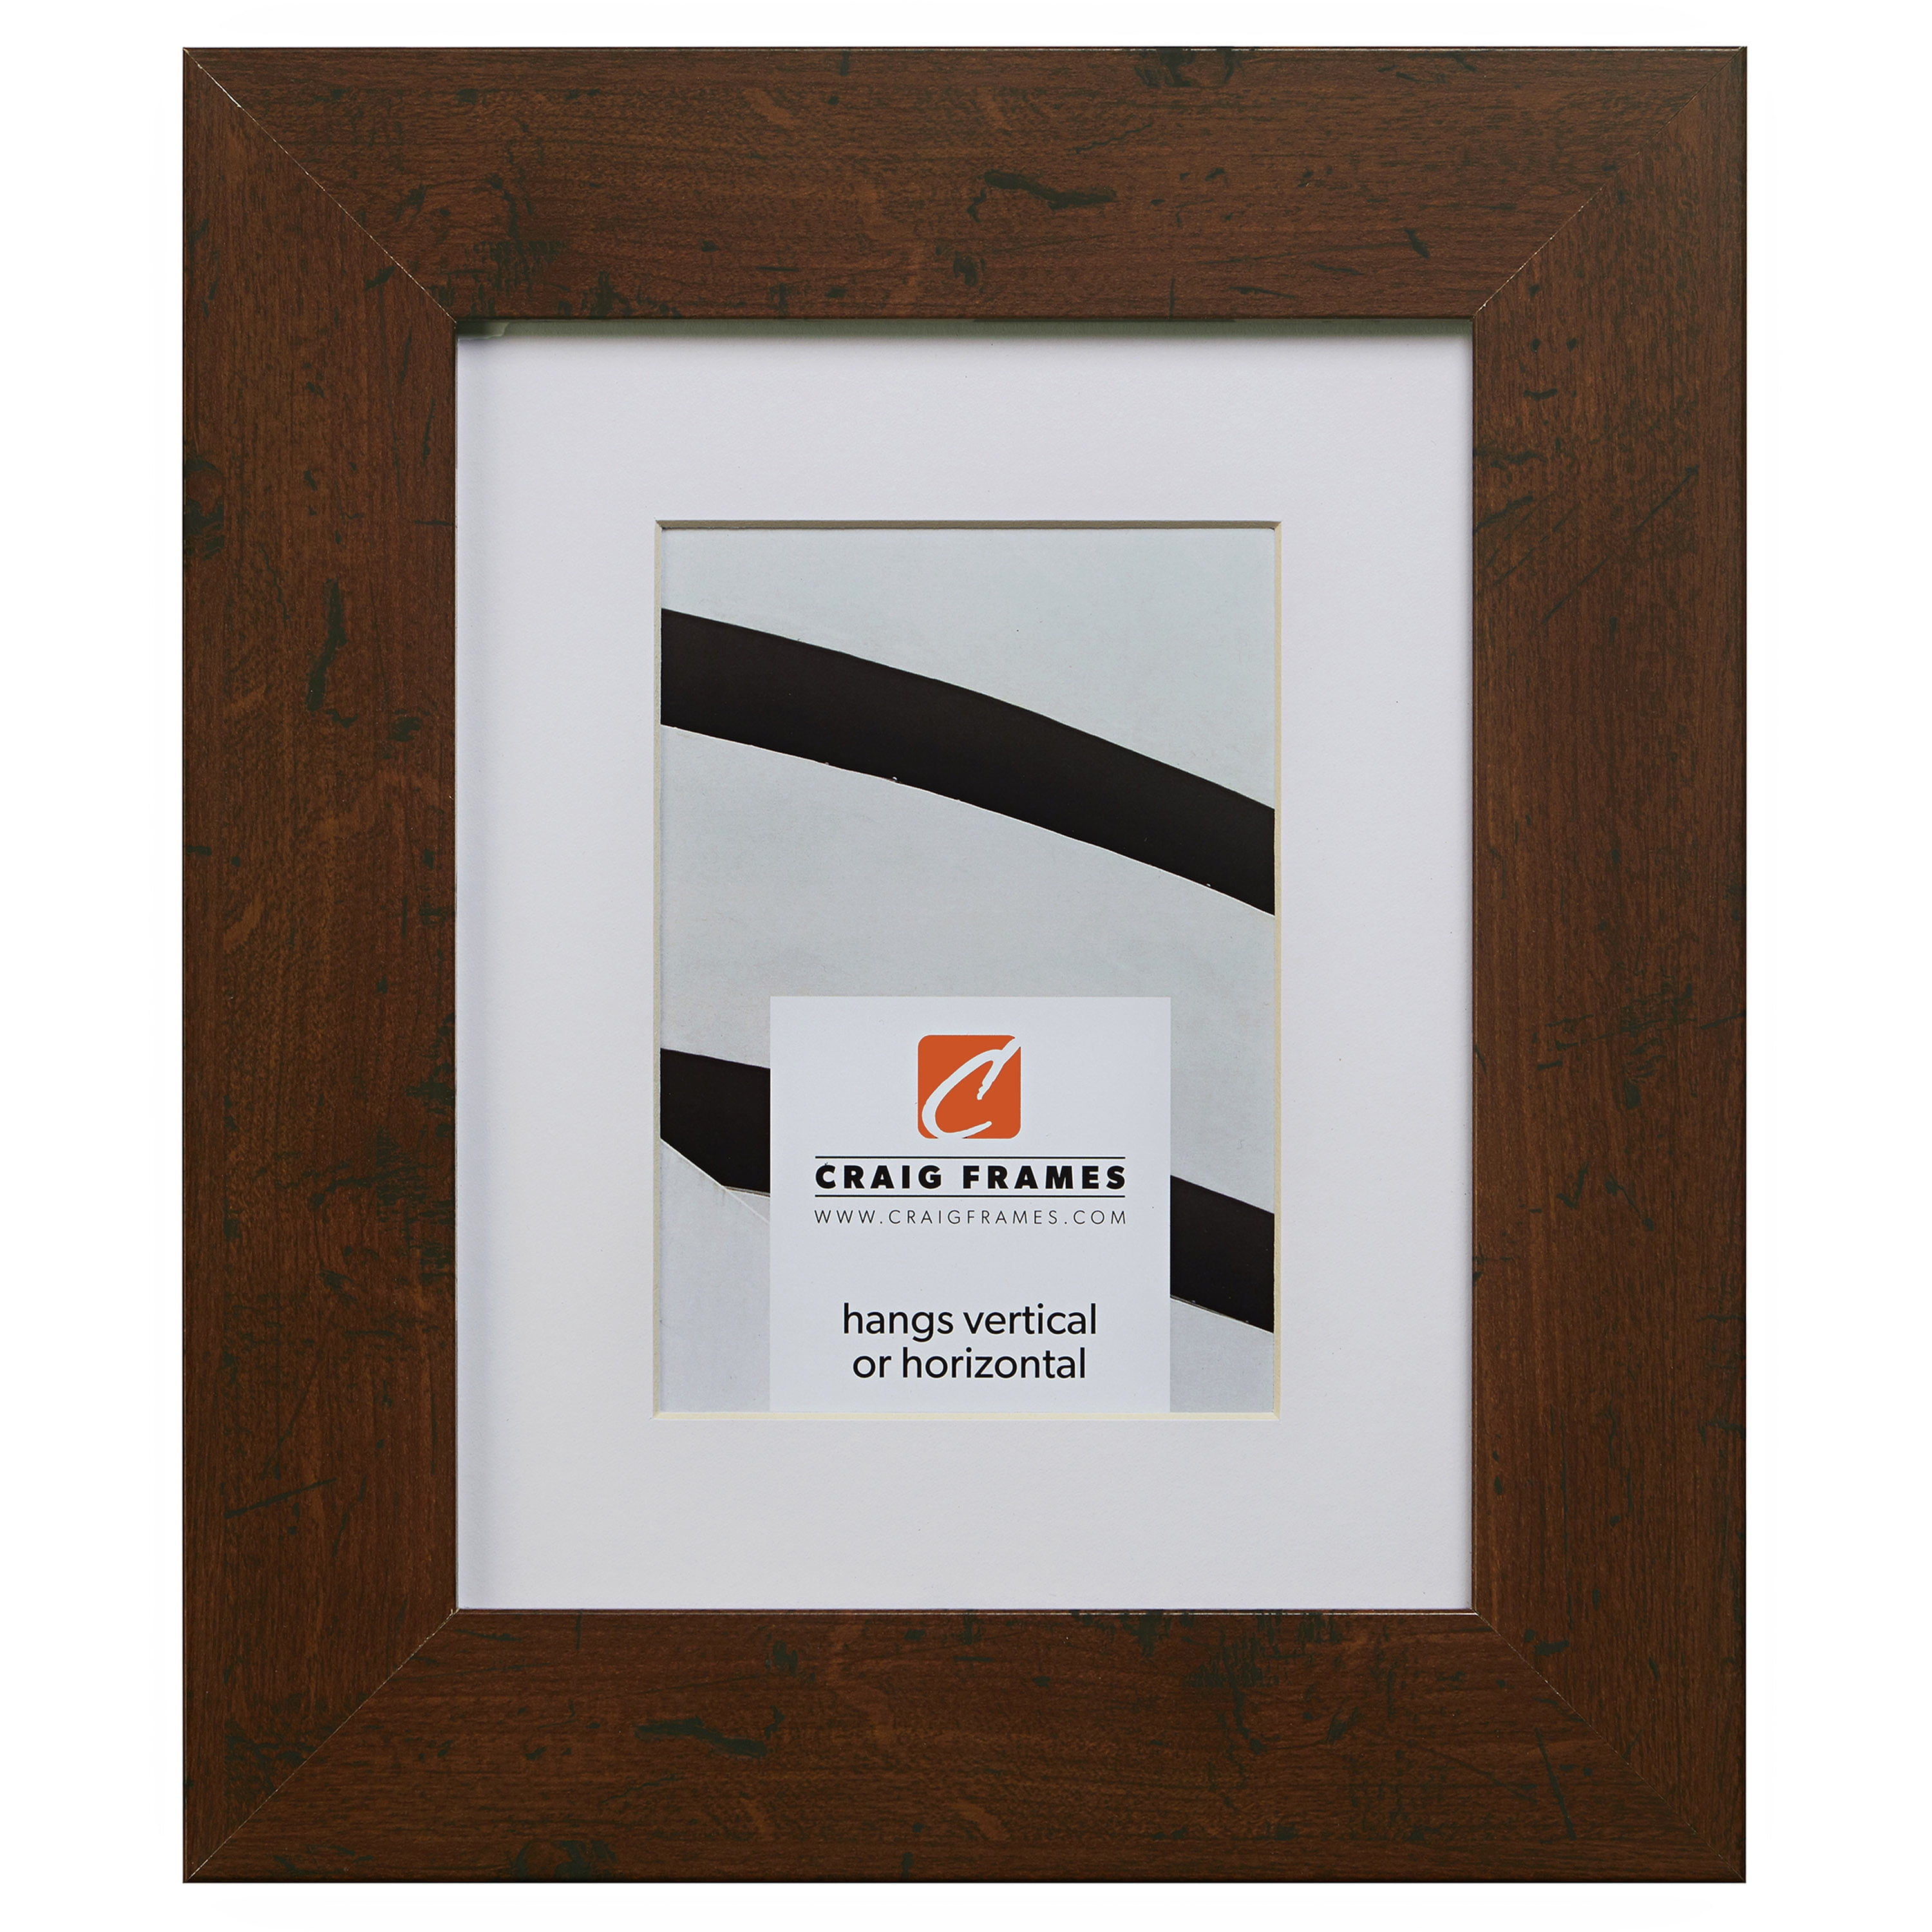 Details about   Wood Picture Frames 11x14 Poster Frame Matted 8x10 Photo Frame 1,2,4,10 Pack 